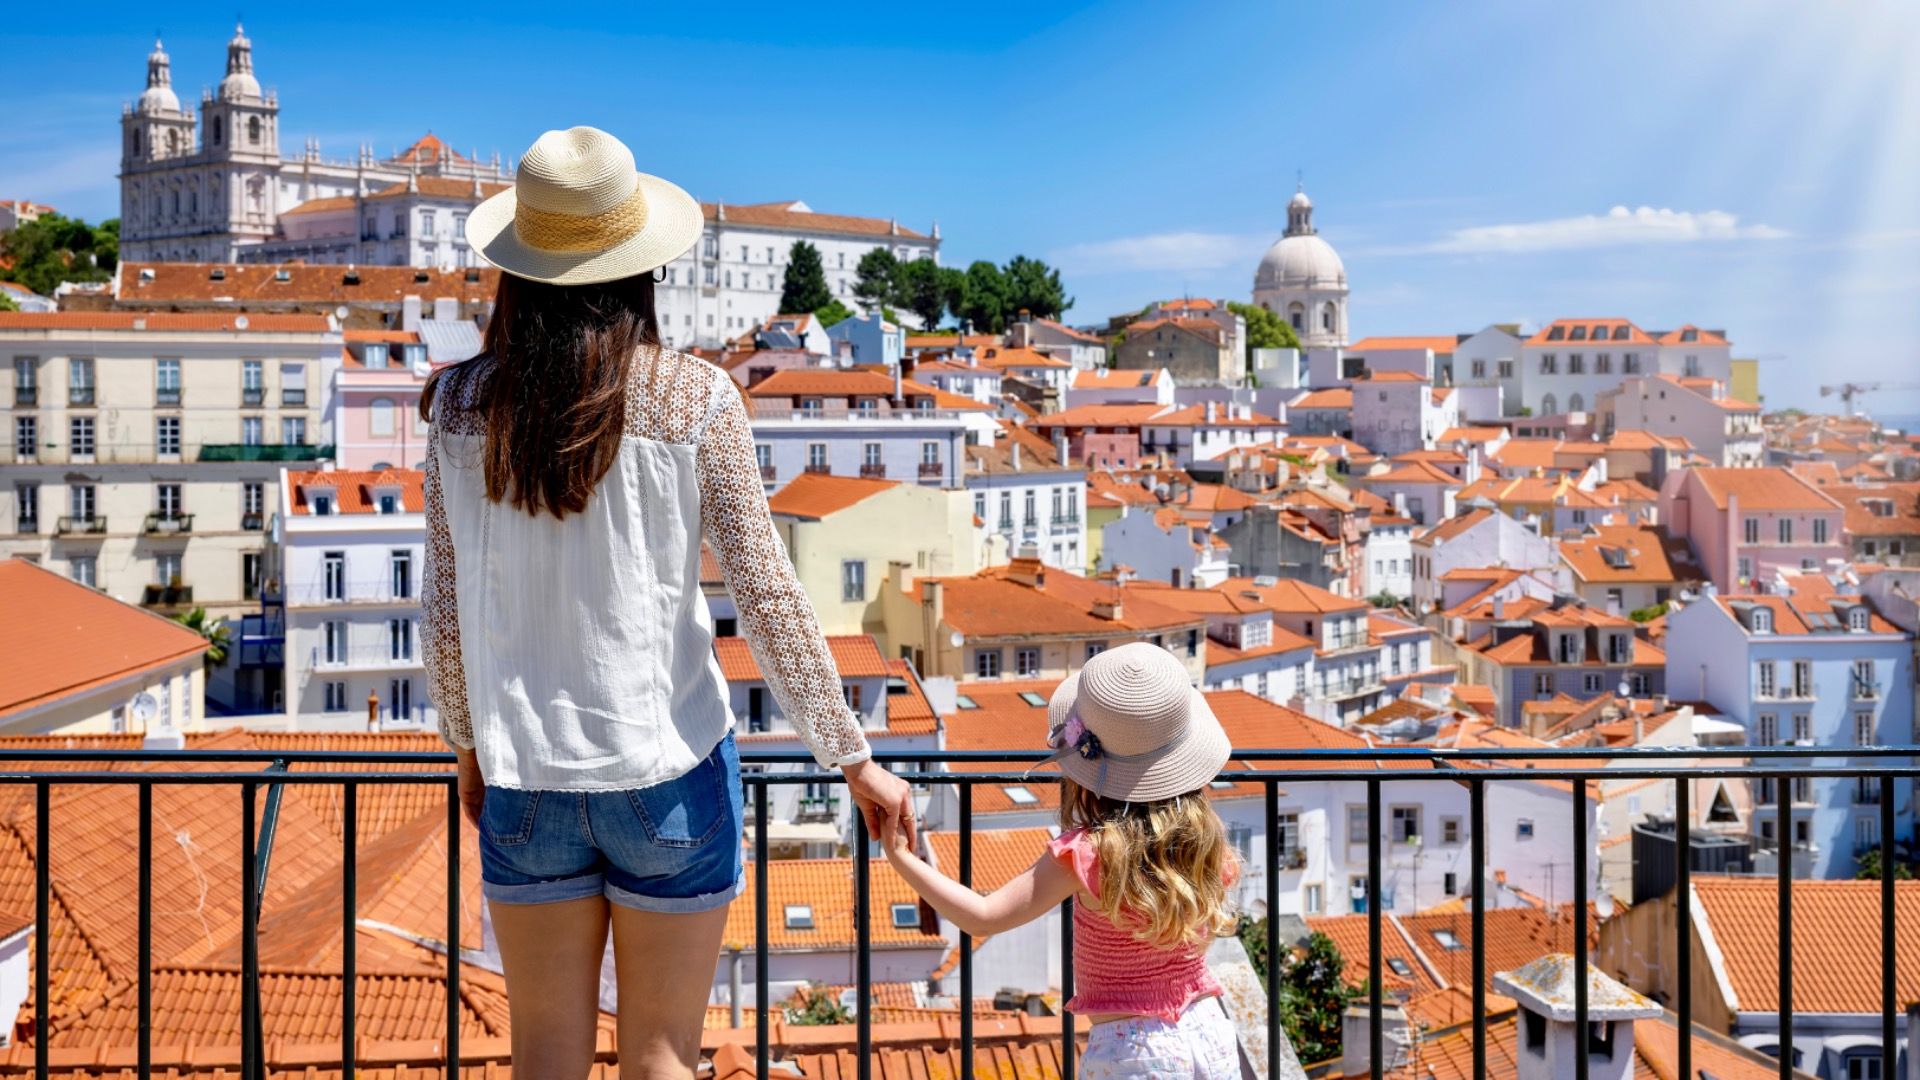 Lisbon, with the colorful houses and roofs, Portugal